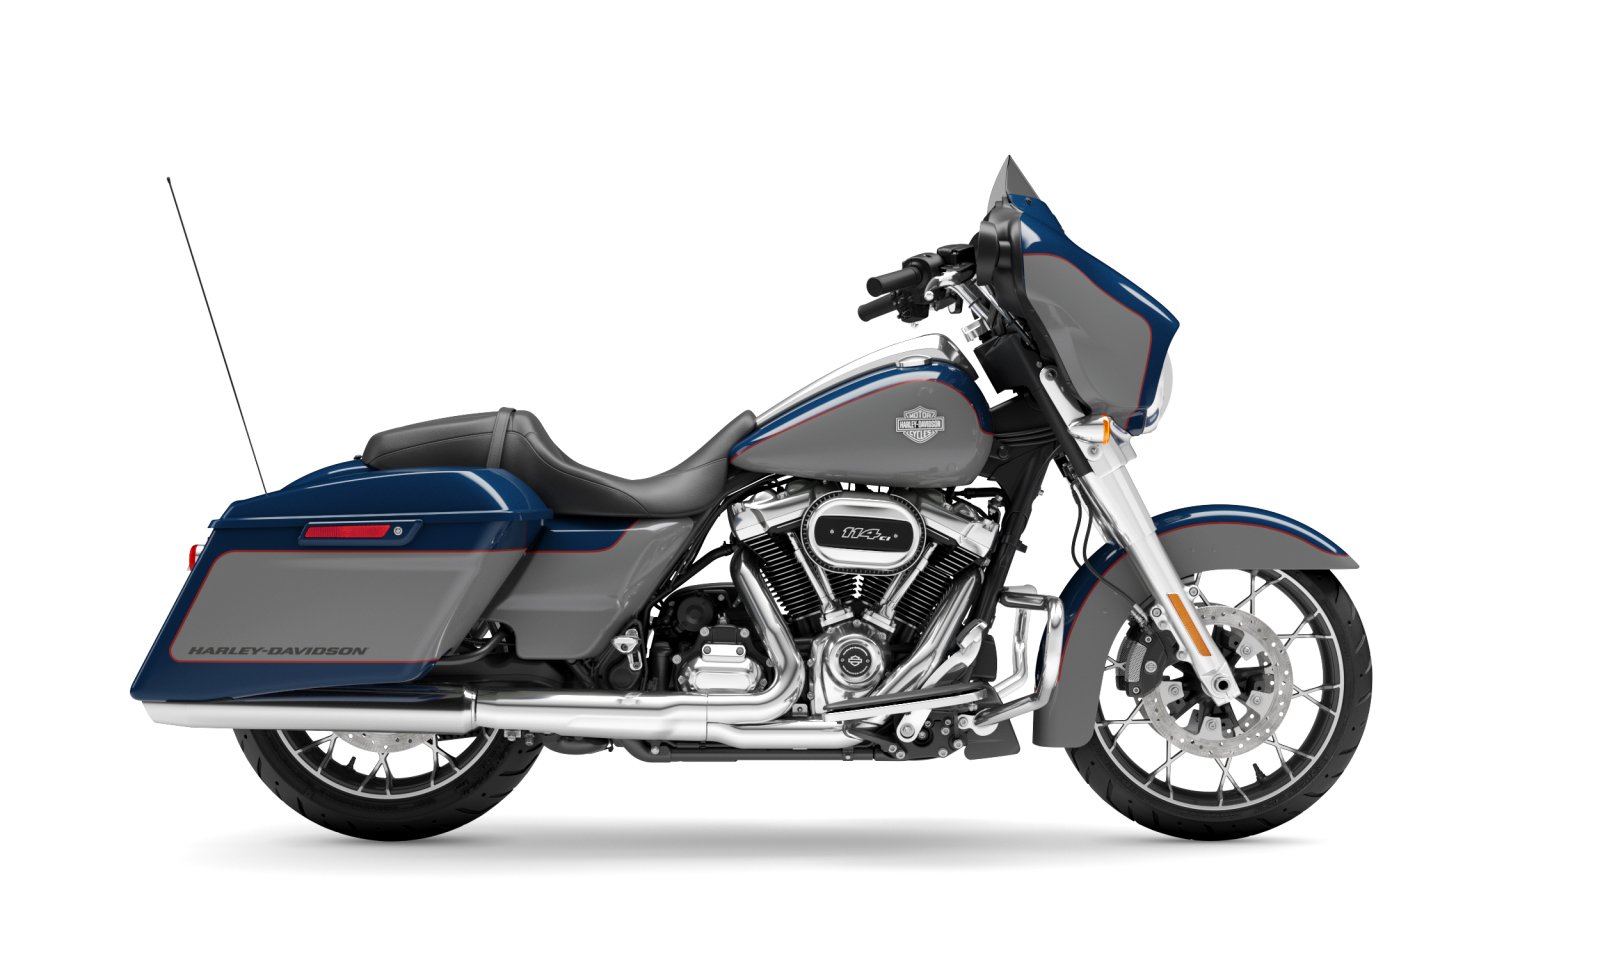 https://www.harley-davidson.com/content/dam/h-d/images/product-images/bikes/motorcycle/2023/2023-street-glide-special/2023-street-glide-special-f94/360/2023-street-glide-special-f94-motorcycle-01.jpg?impolicy=myresize&rw=1600